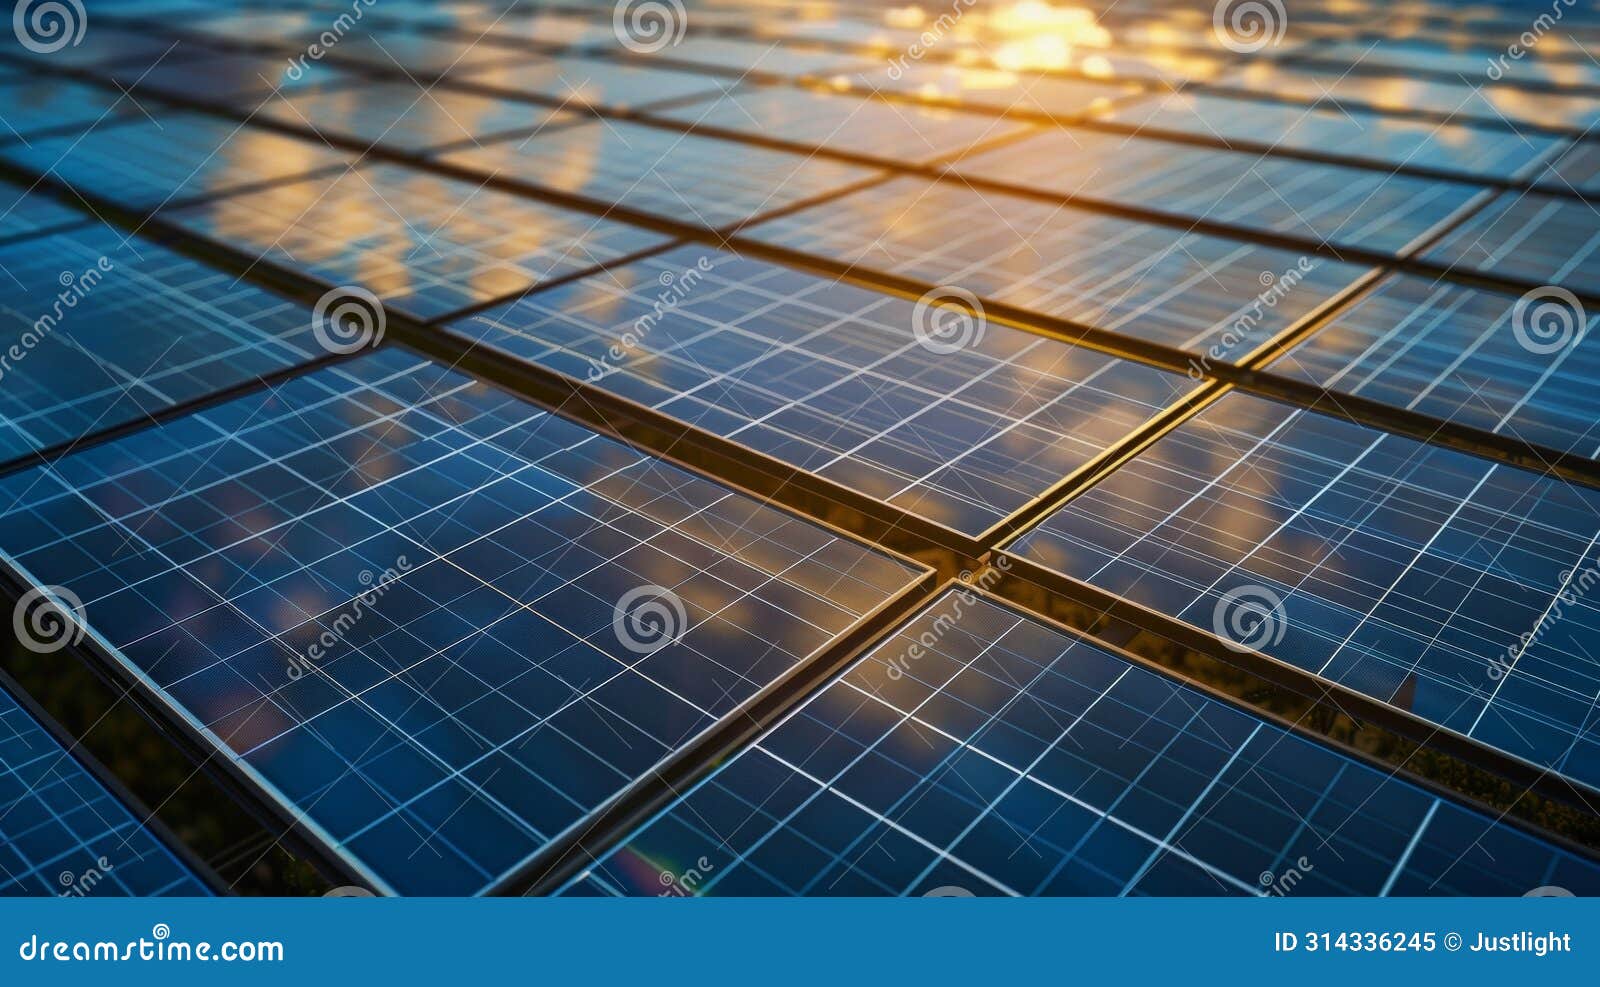 an aerial shot showcasing a largescale floating solar panel system covering a vast expanse of water providing renewable